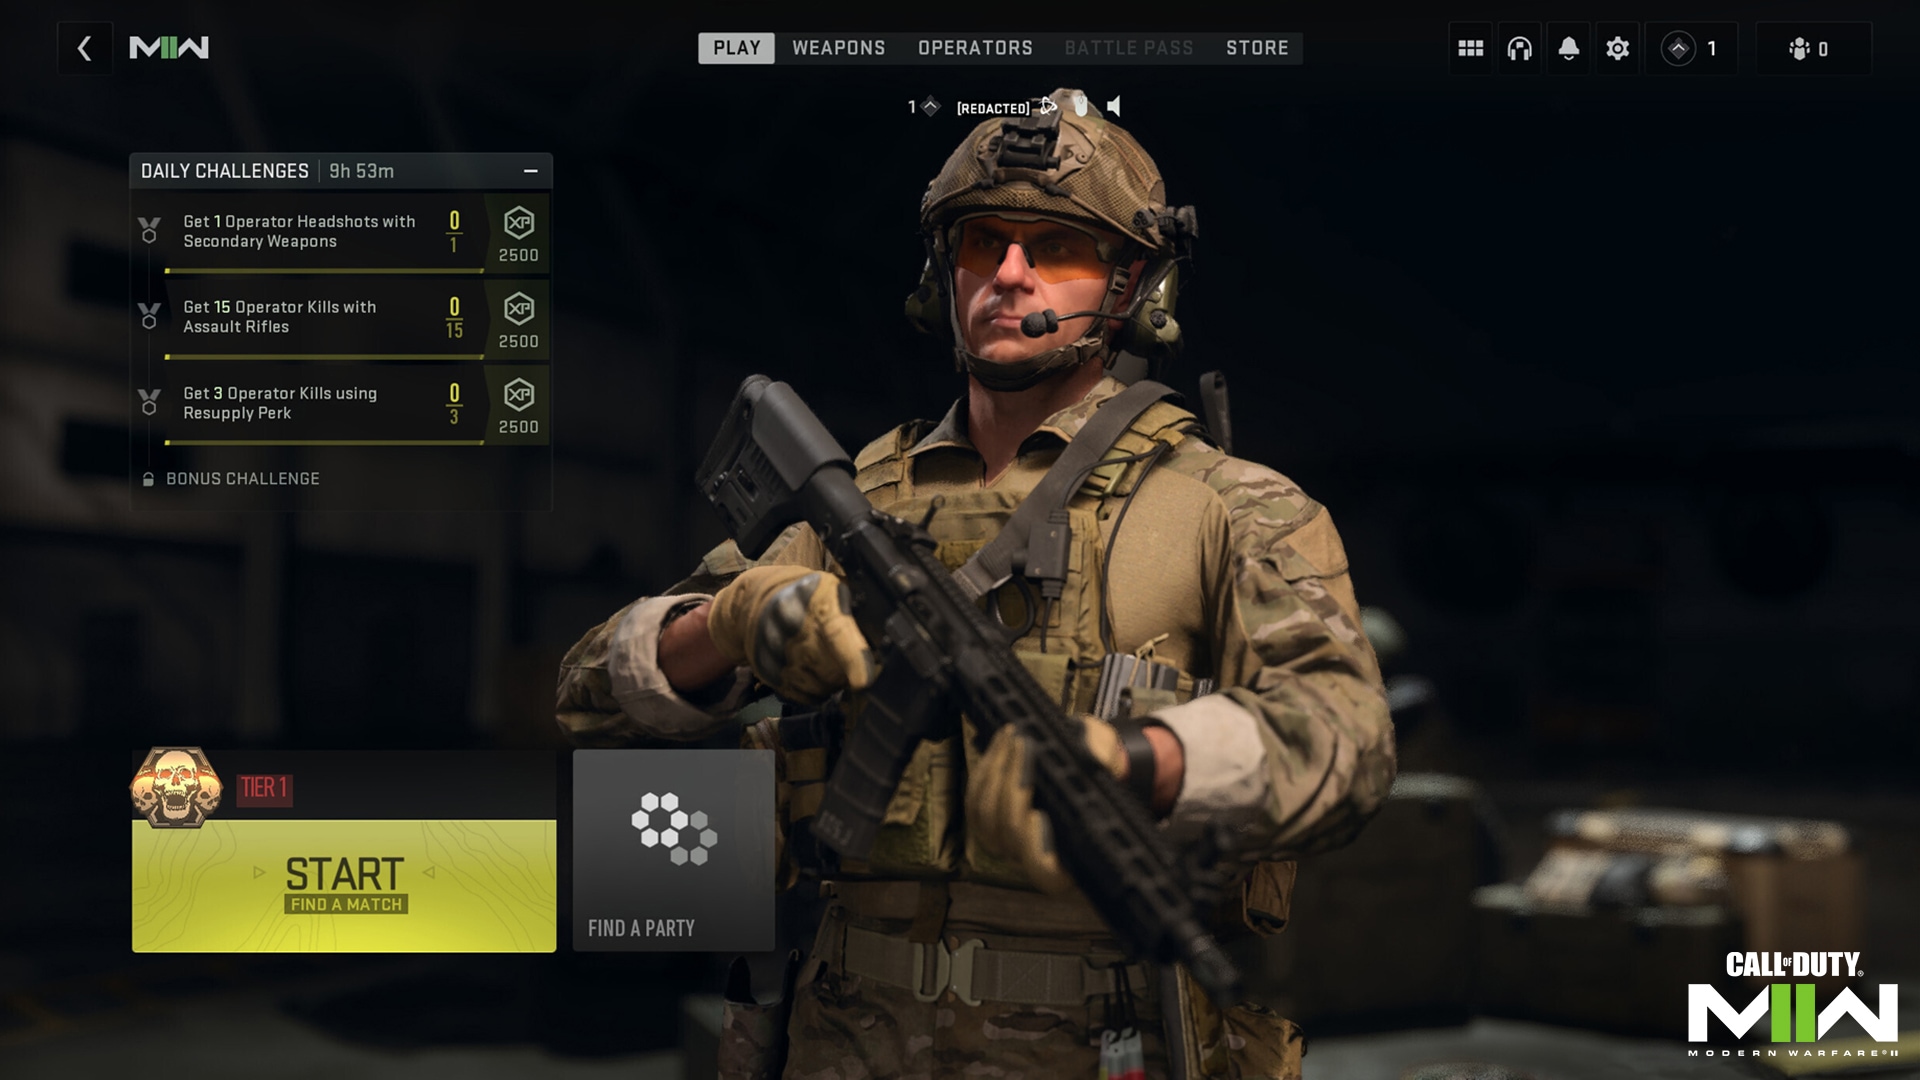 Ahead of COD Next, All Mastery Challenges in Call of Duty: Modern